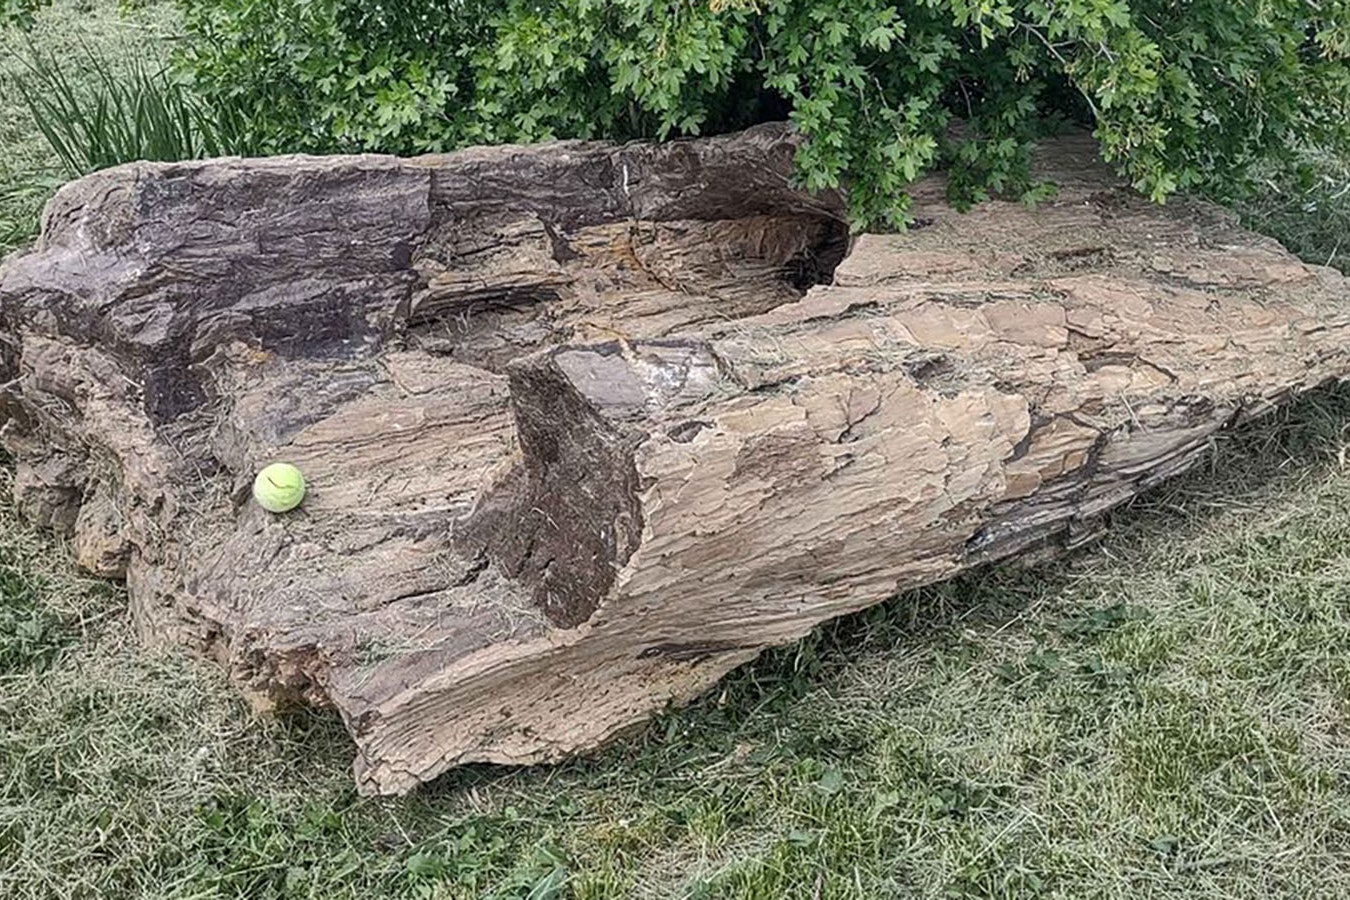 This 1-ton hollowed out petrified log has been in Travis Smith's family for generations, but now it's for sale for $20,000.